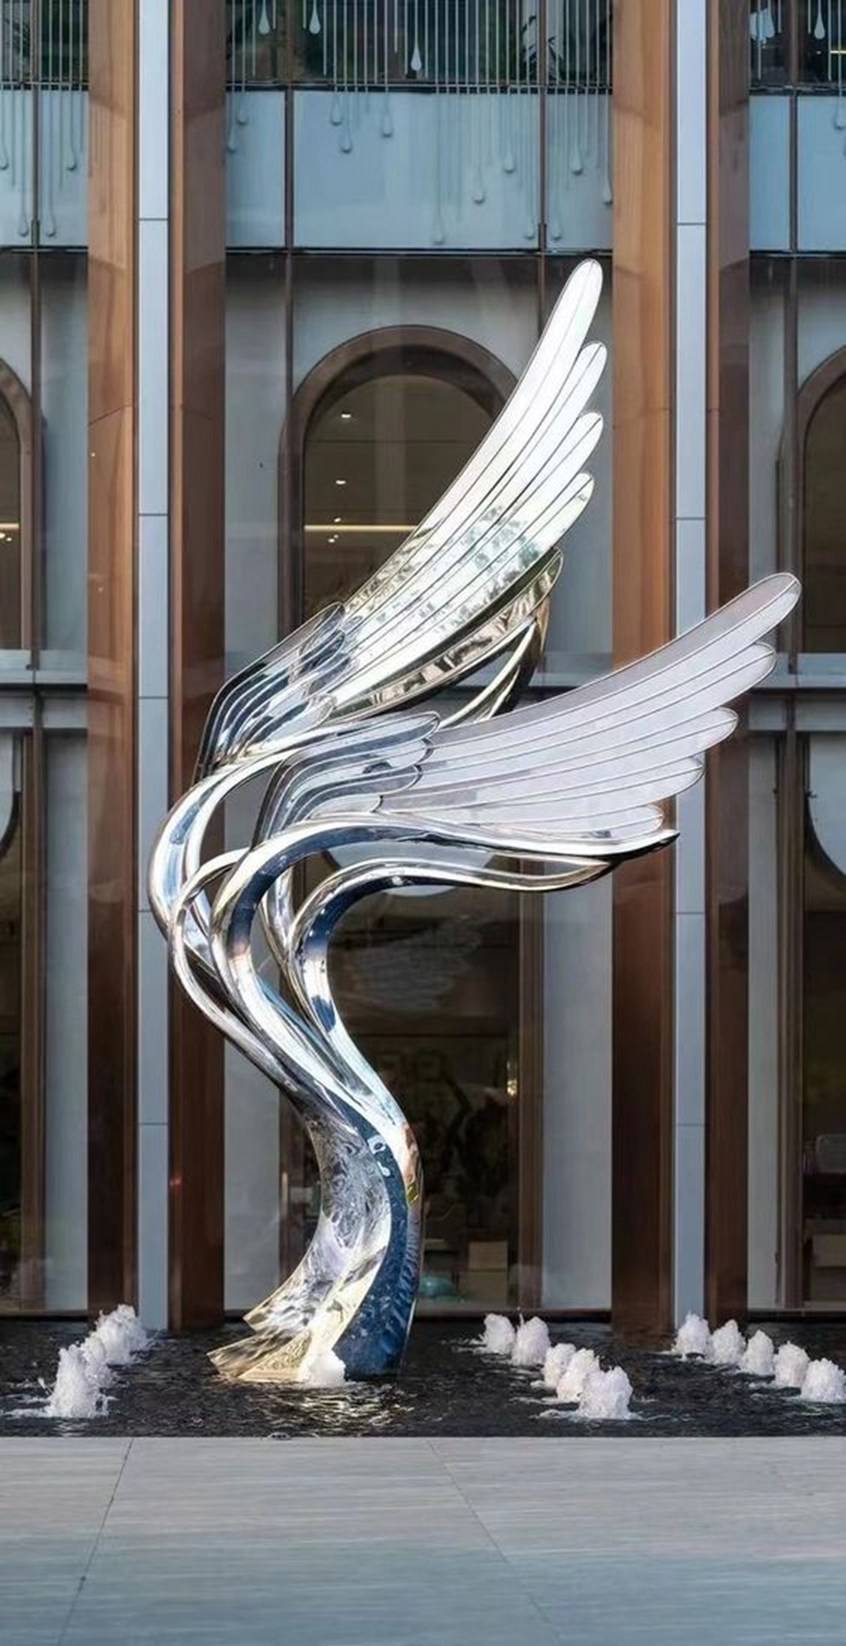 Exquisite fountain stainless steel wing sculpture